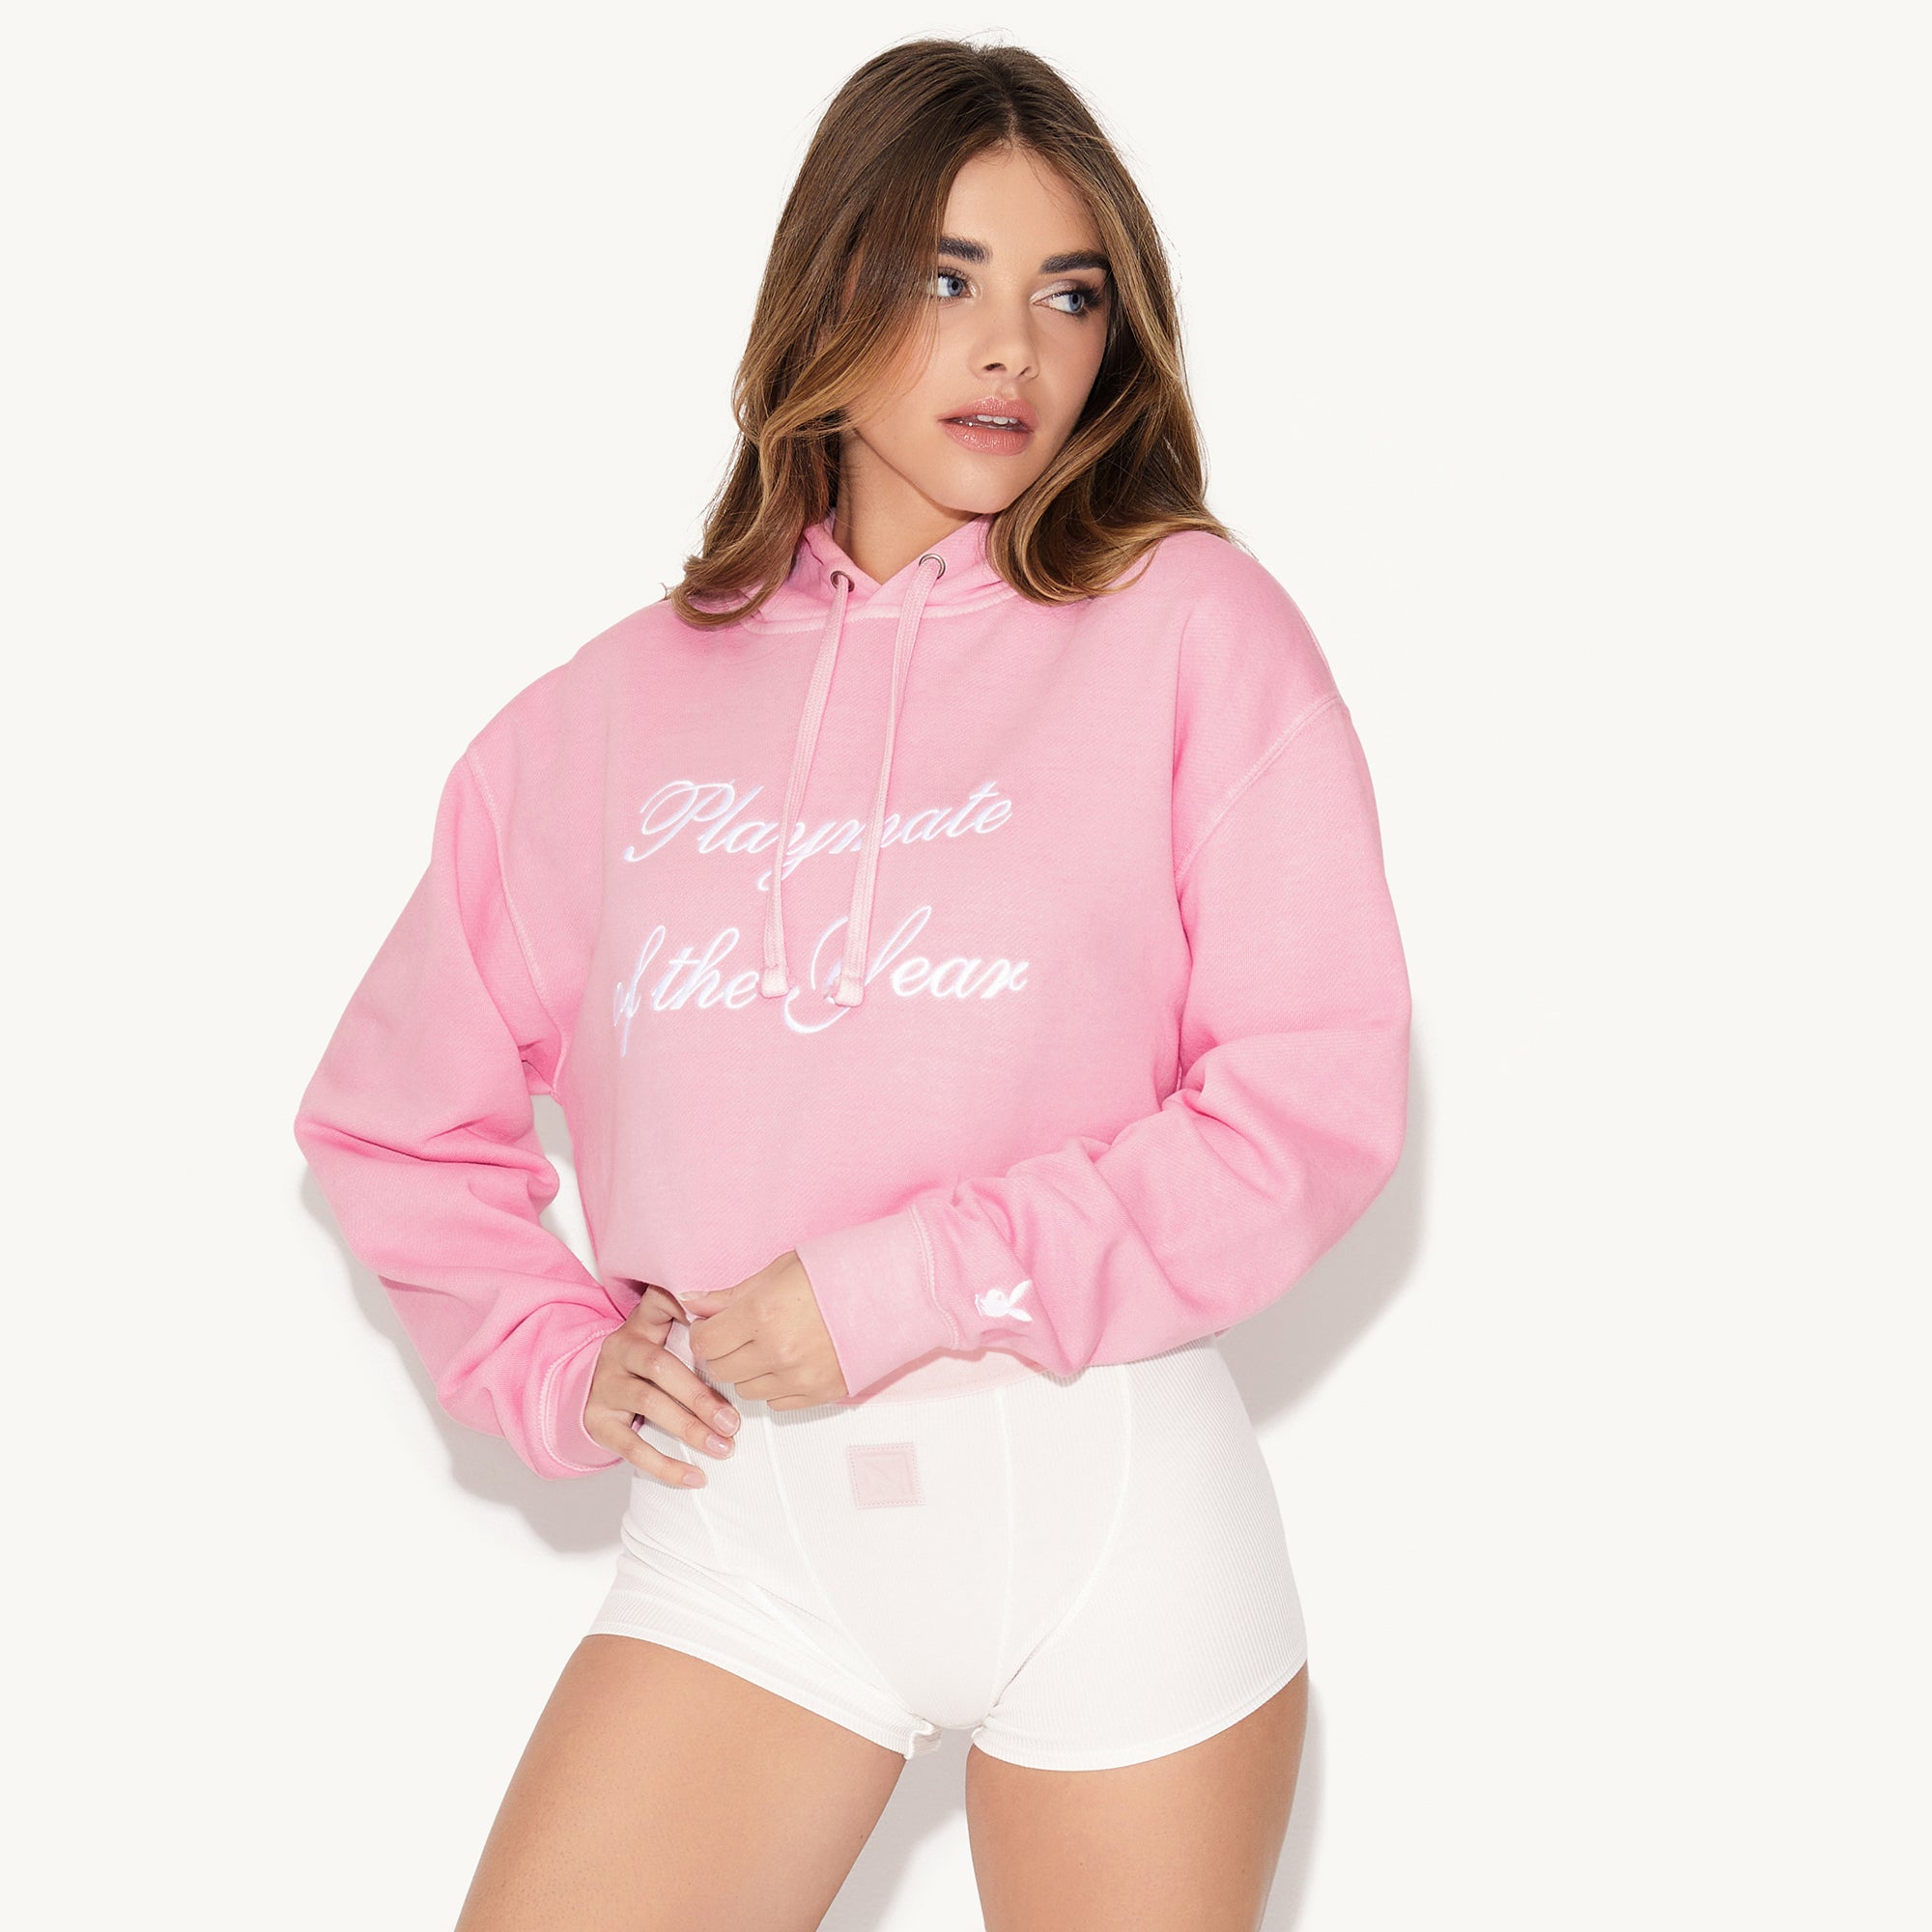 Playmate of the Year Hoodie - Pink / White Print